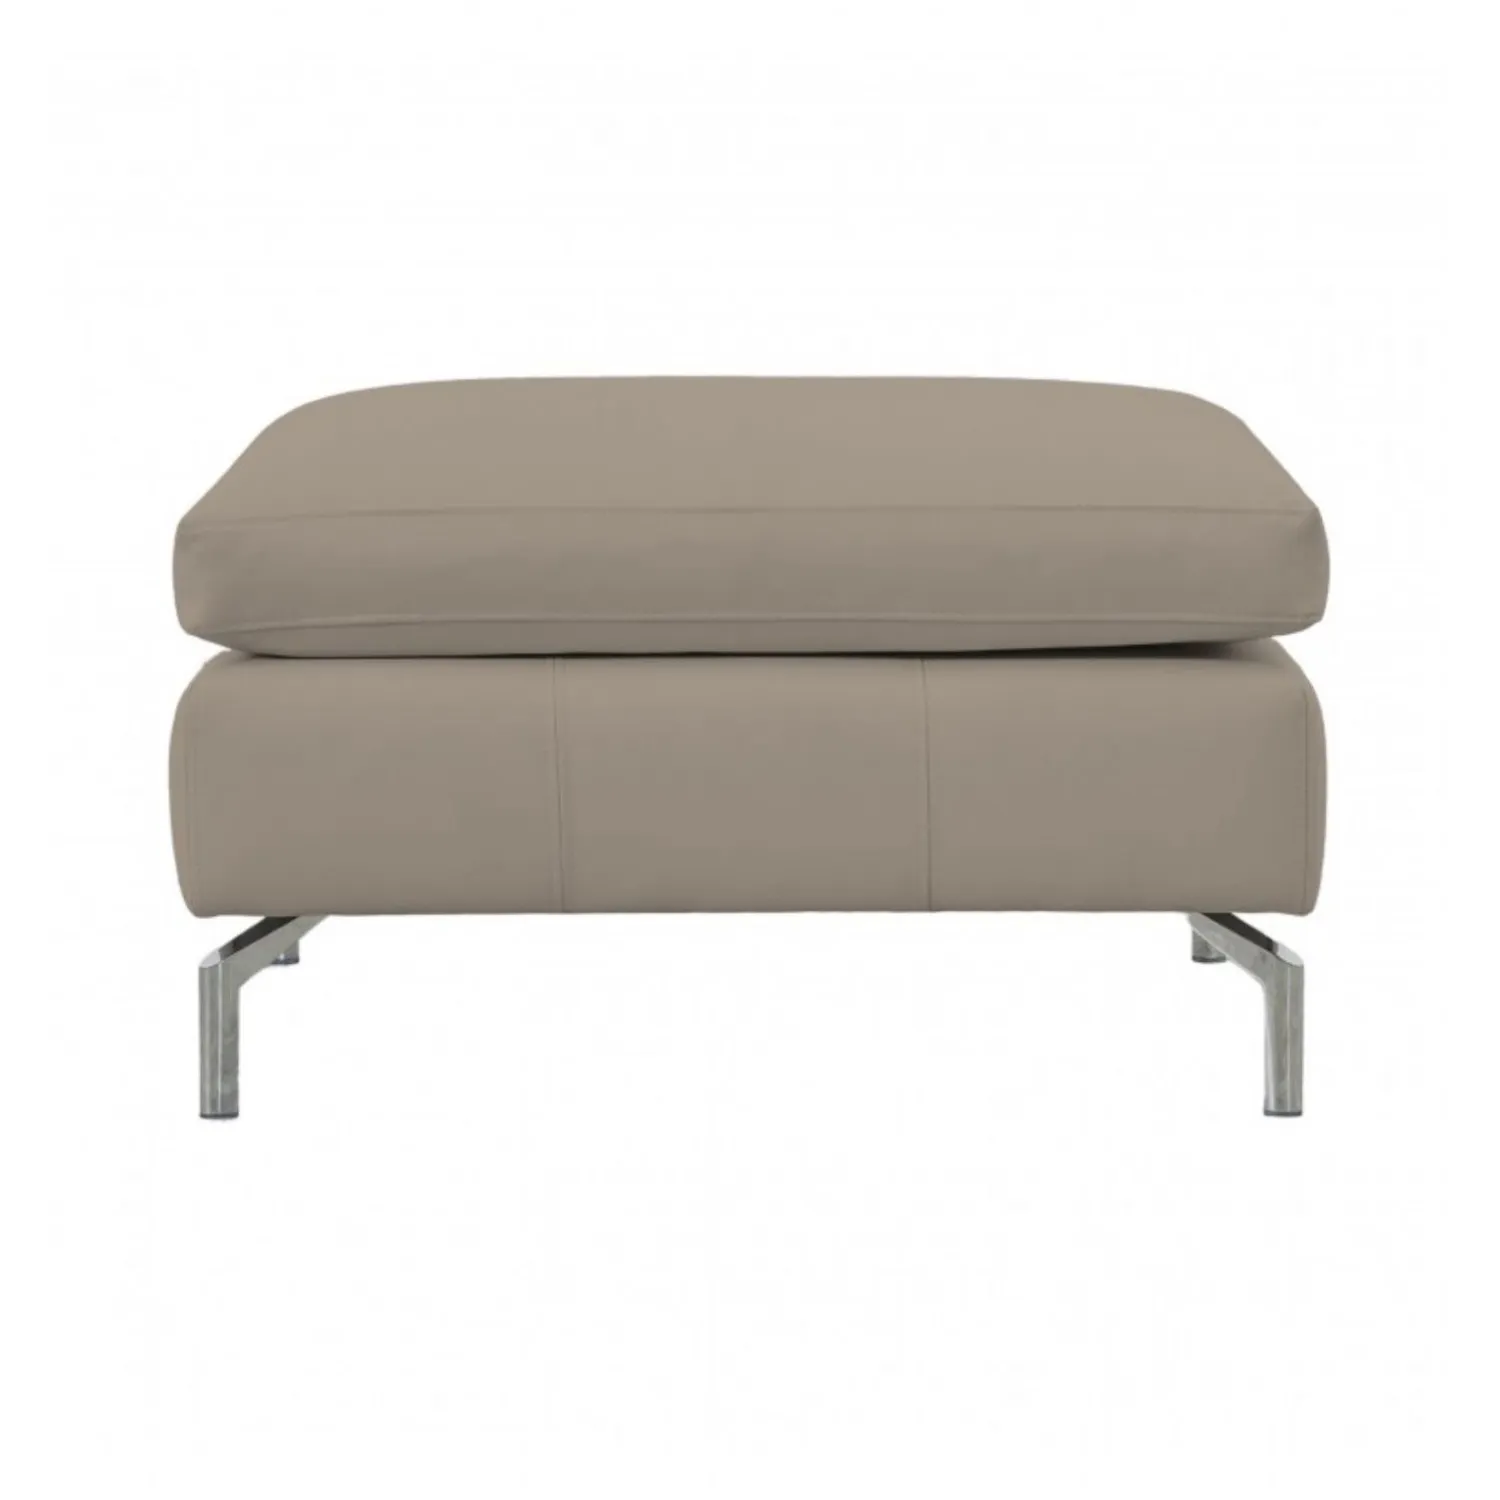 Modern Style Sabino Pebble Faux Leather Upholstered Living Room Square Footstool 50x85cm